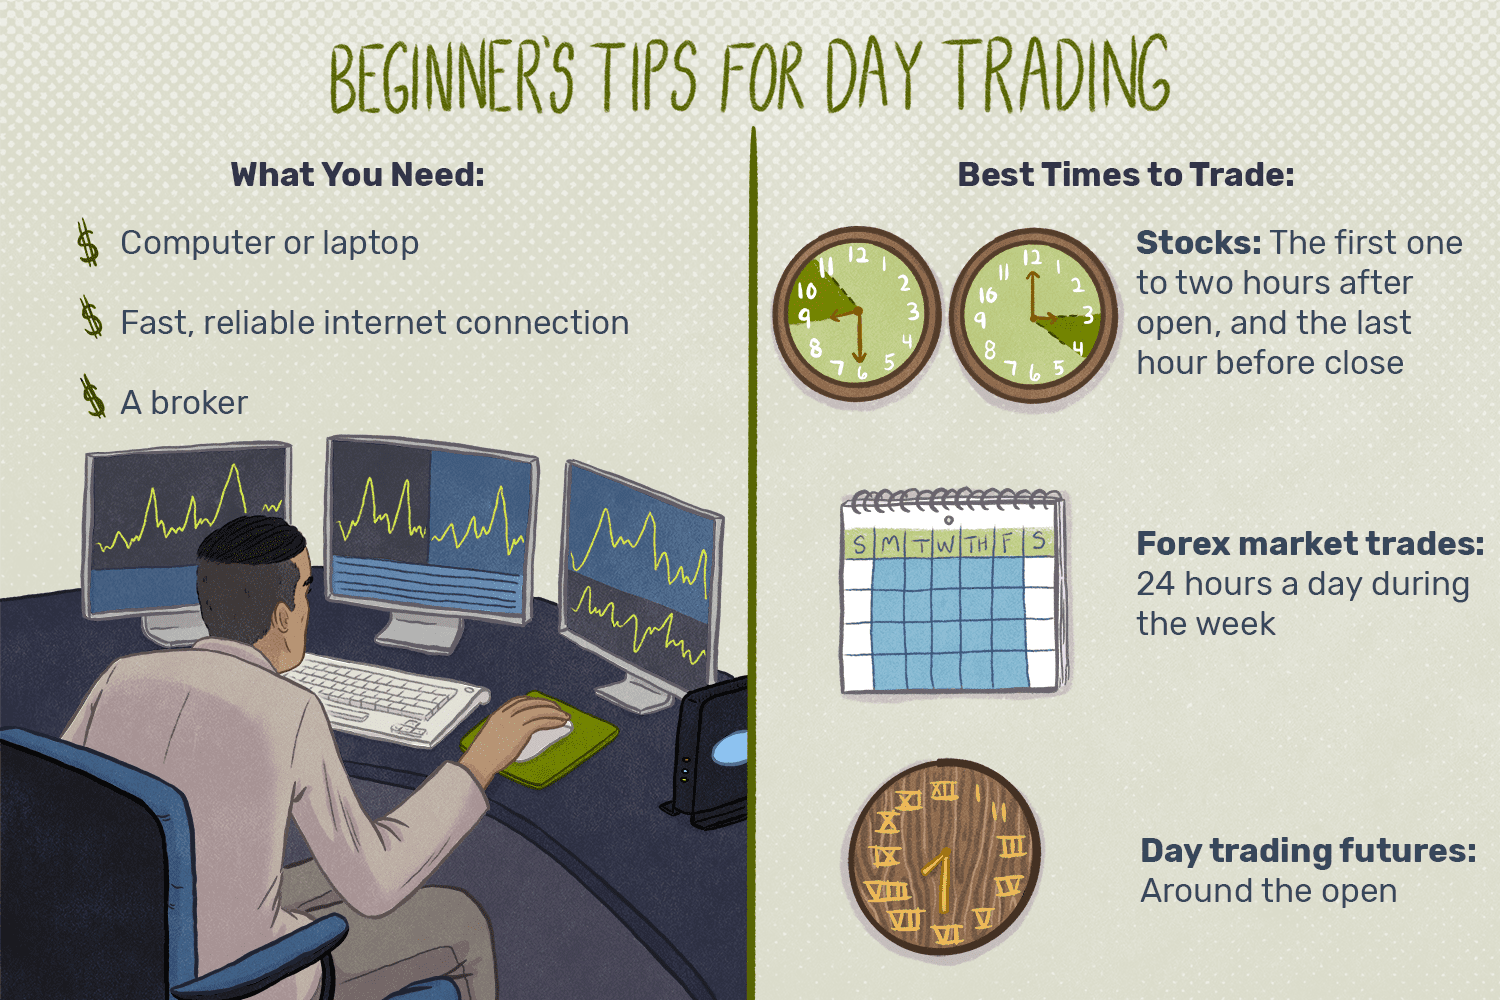 A Beginner's Guide to Day Trading - Tips and Strategies